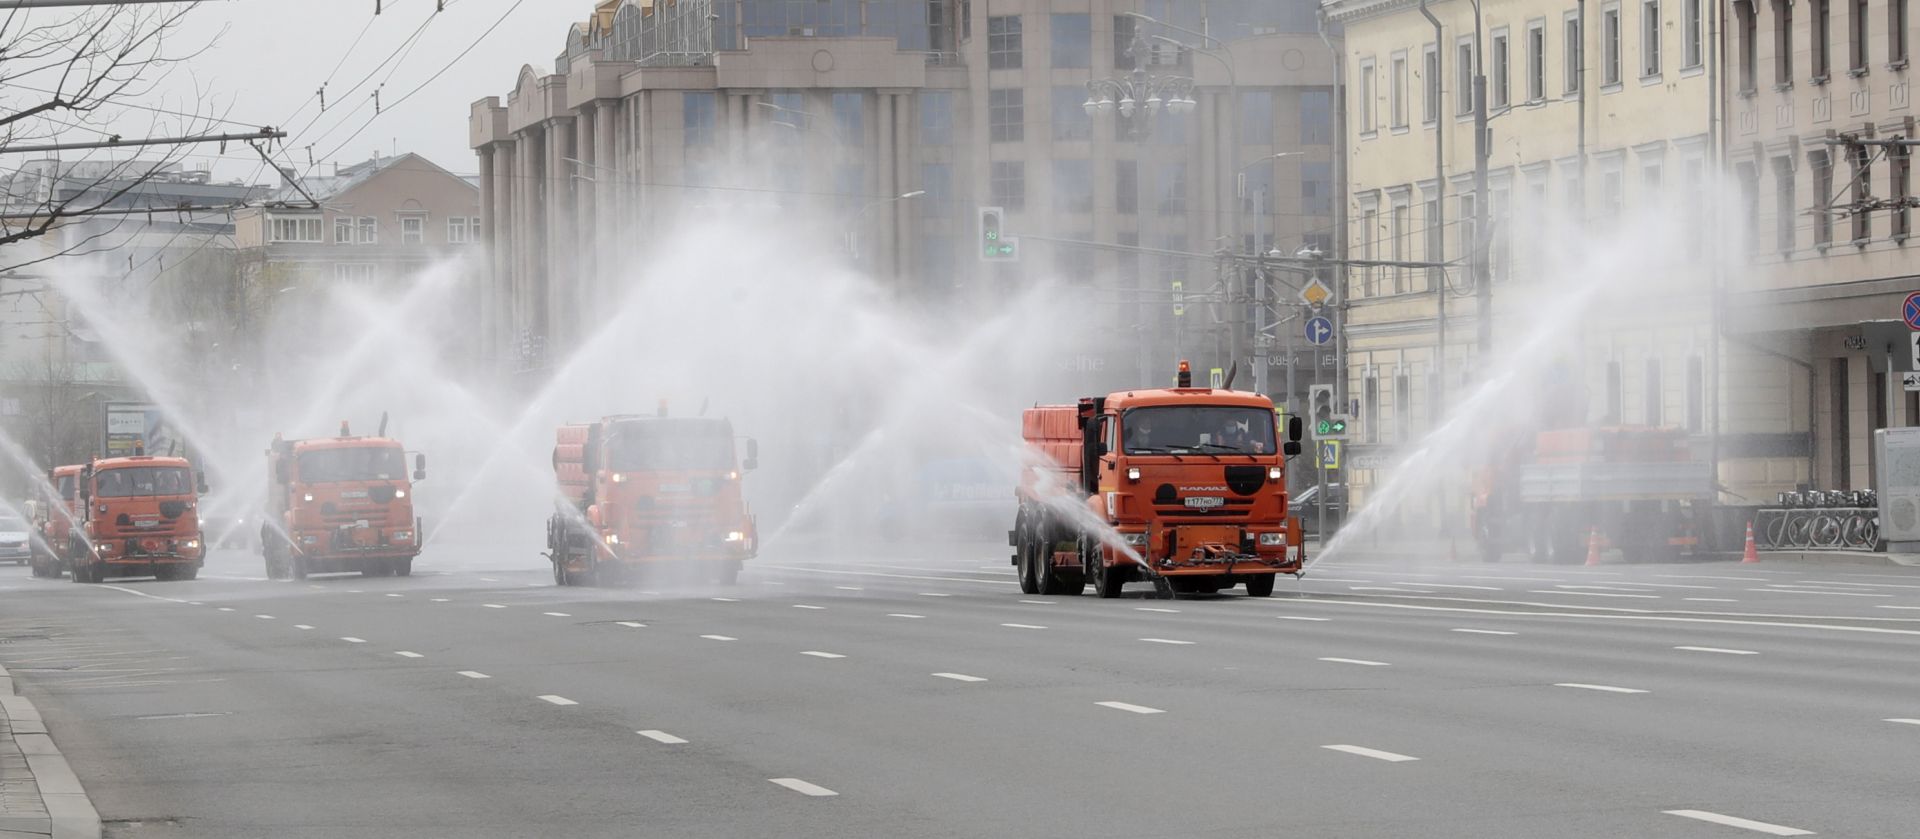 epa08382158 Municipal watering trucks spray disinfectant liquid on an avenue in downtown Moscow, Russia, 24 April 2020. This is the fifth mass disinfection of public spaces undertaken in Moscow so far in a bid to curb the spread of the pandemic COVID-19 disease caused by the SARS-CoV-2 coronavirus.  EPA/SERGEI CHIRIKOV